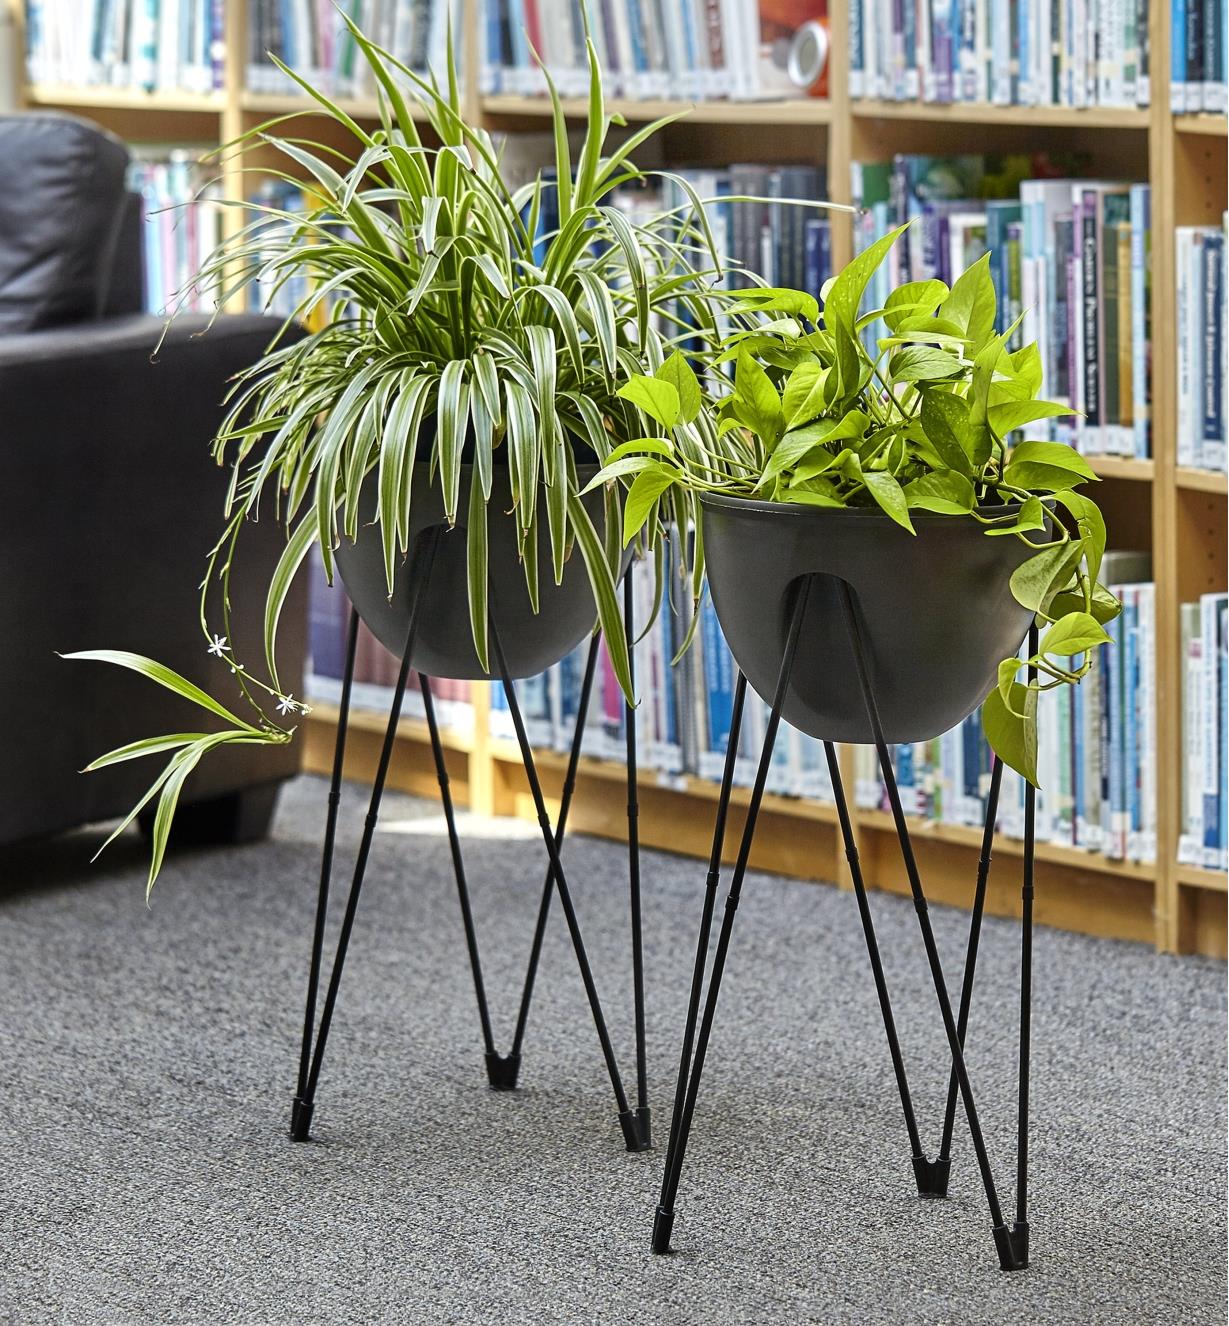 A spider plant and a pothos plant growing indoors in two self-watering planters